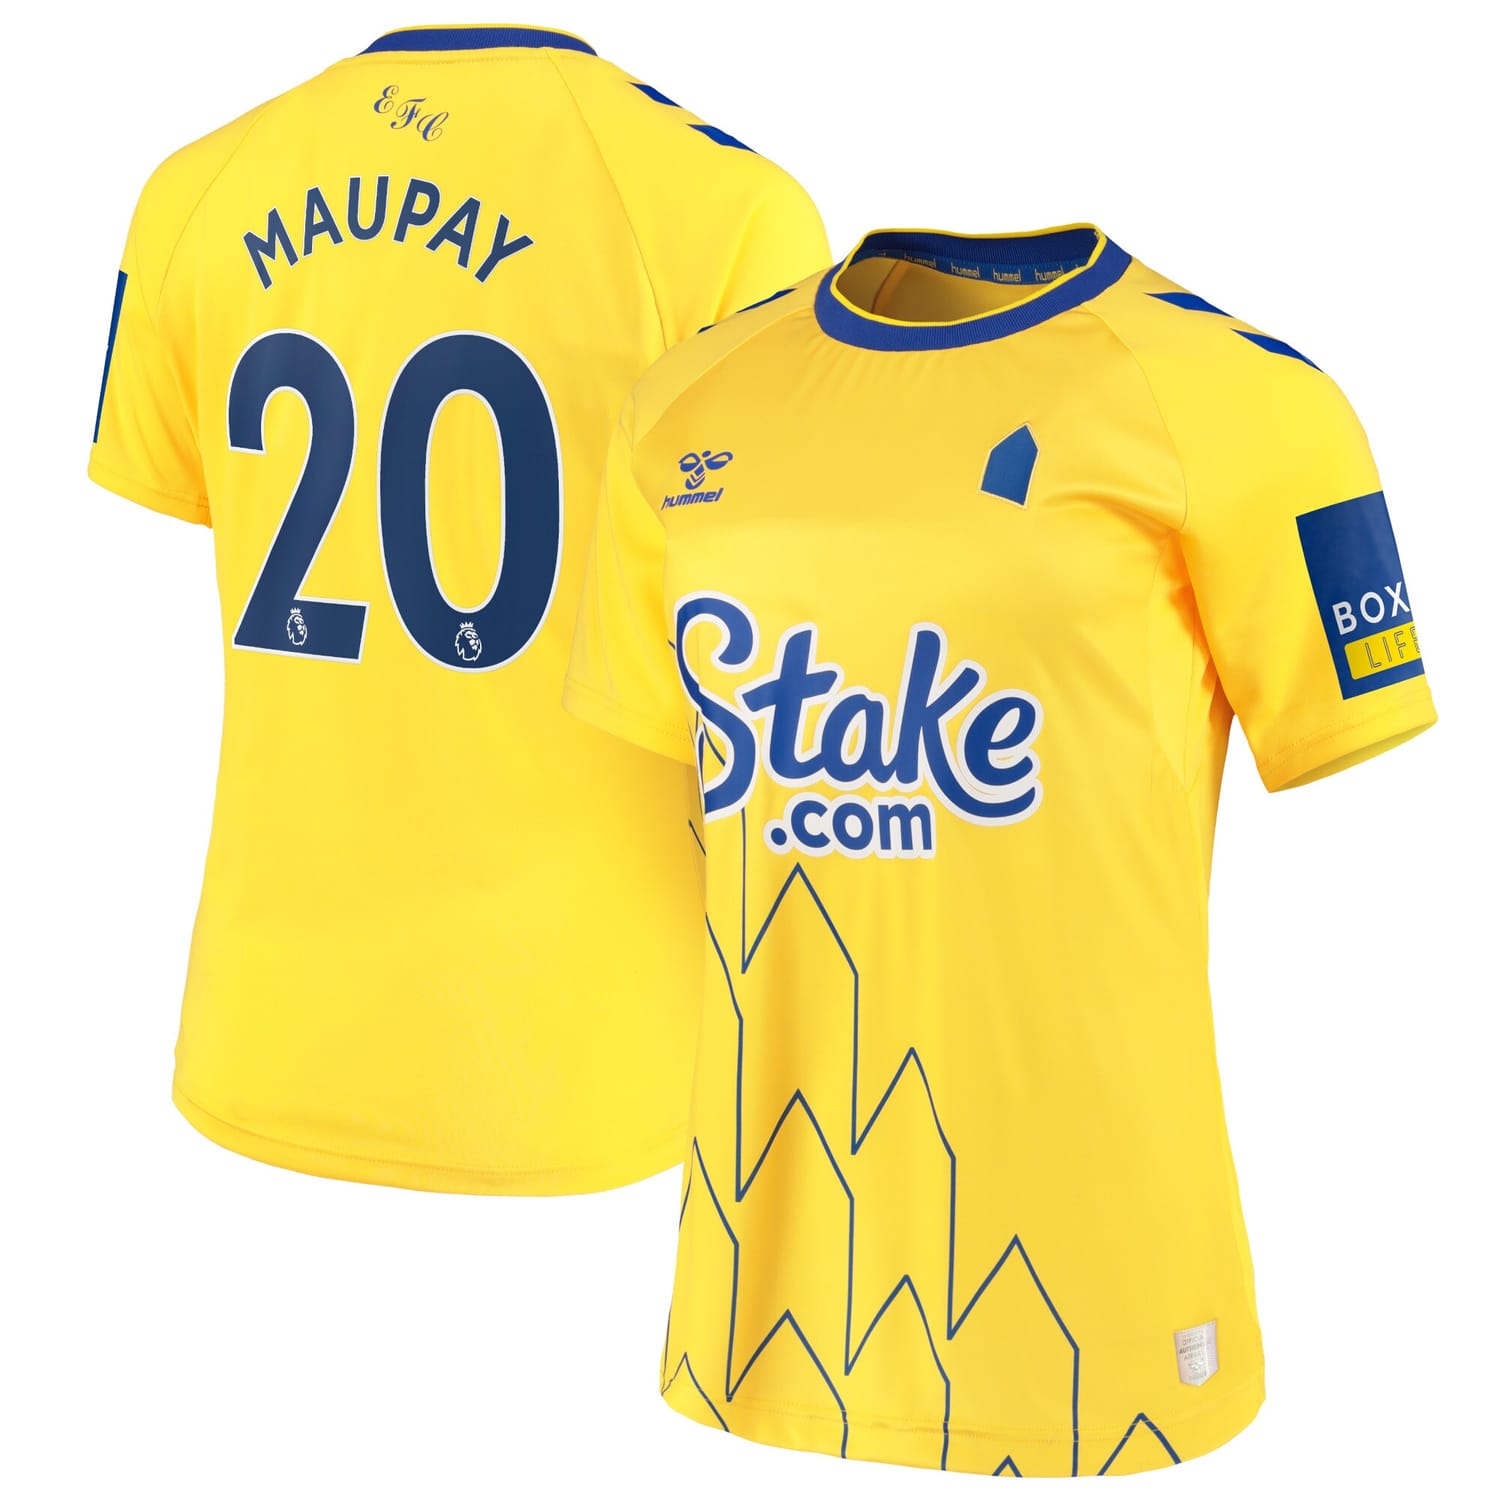 Premier League Everton Third Jersey Shirt 2022-23 player Neal Maupay 20 printing for Women